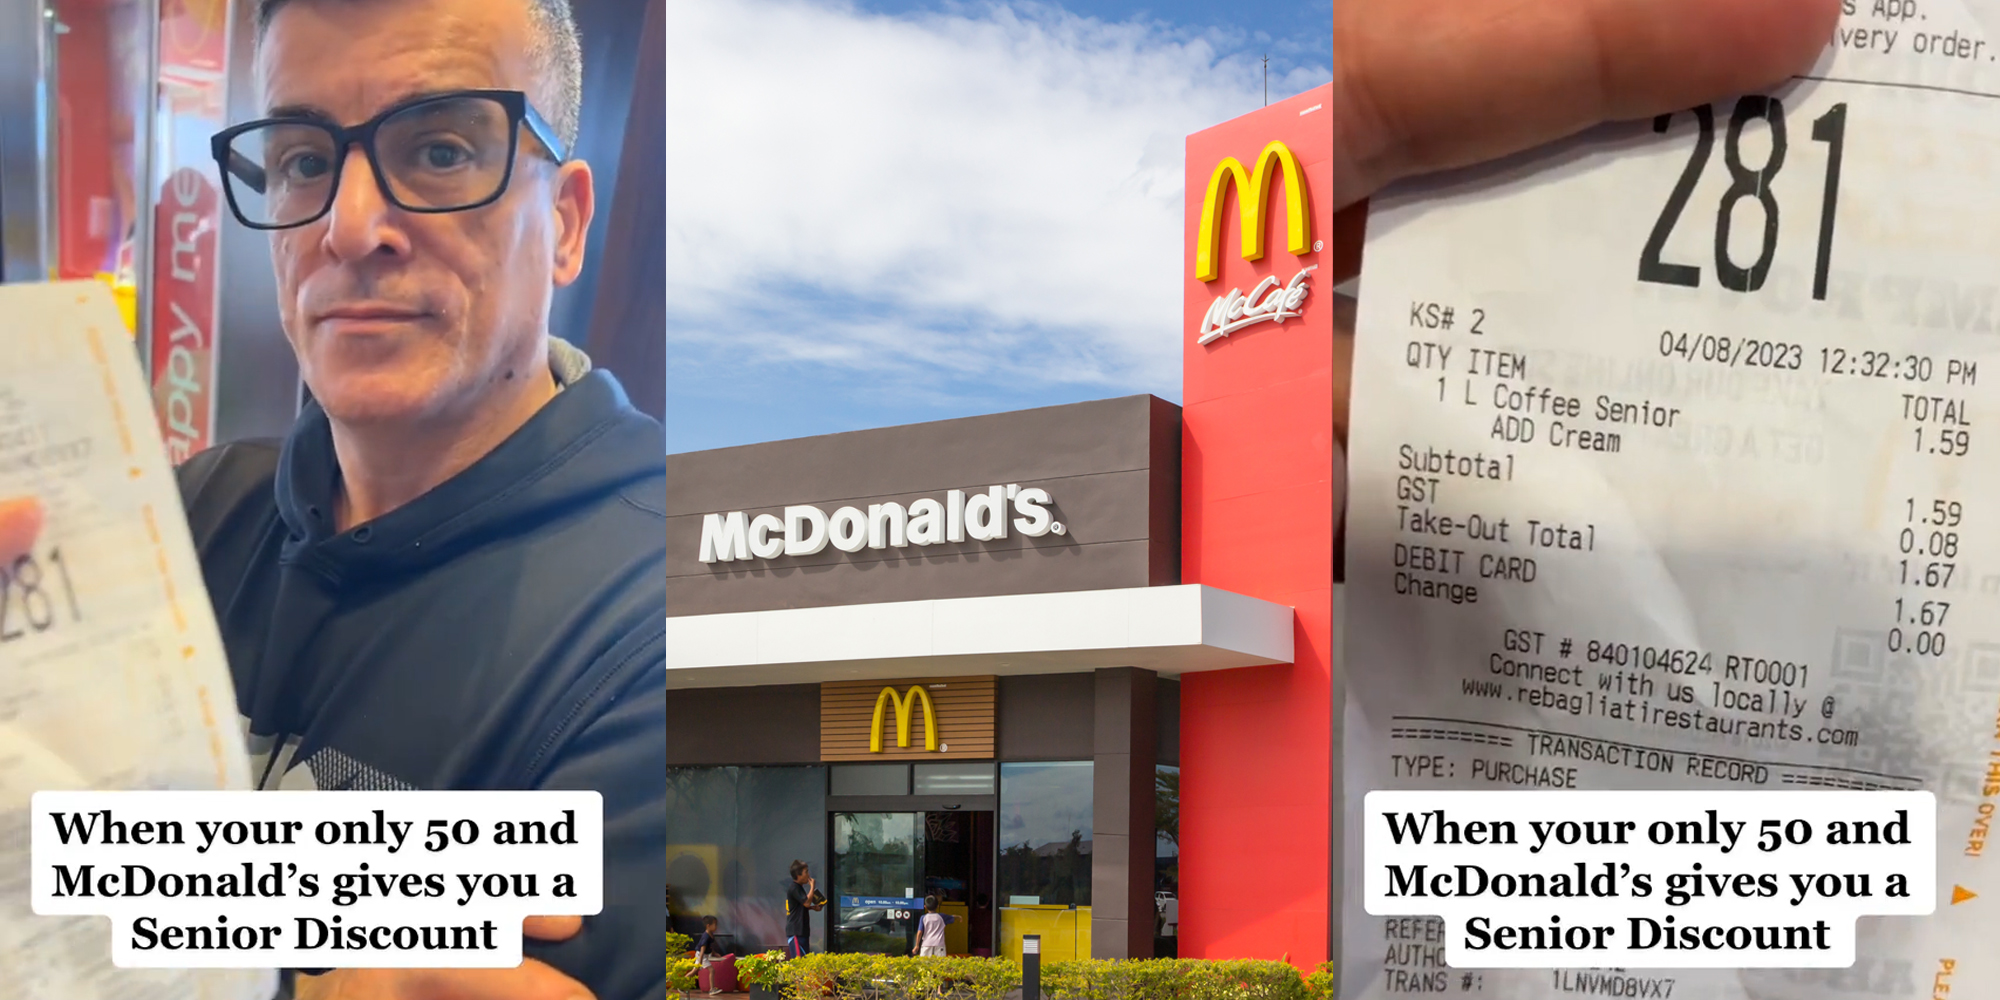 Customer Receives Senior Discount at McDonald's. He's Only 50.